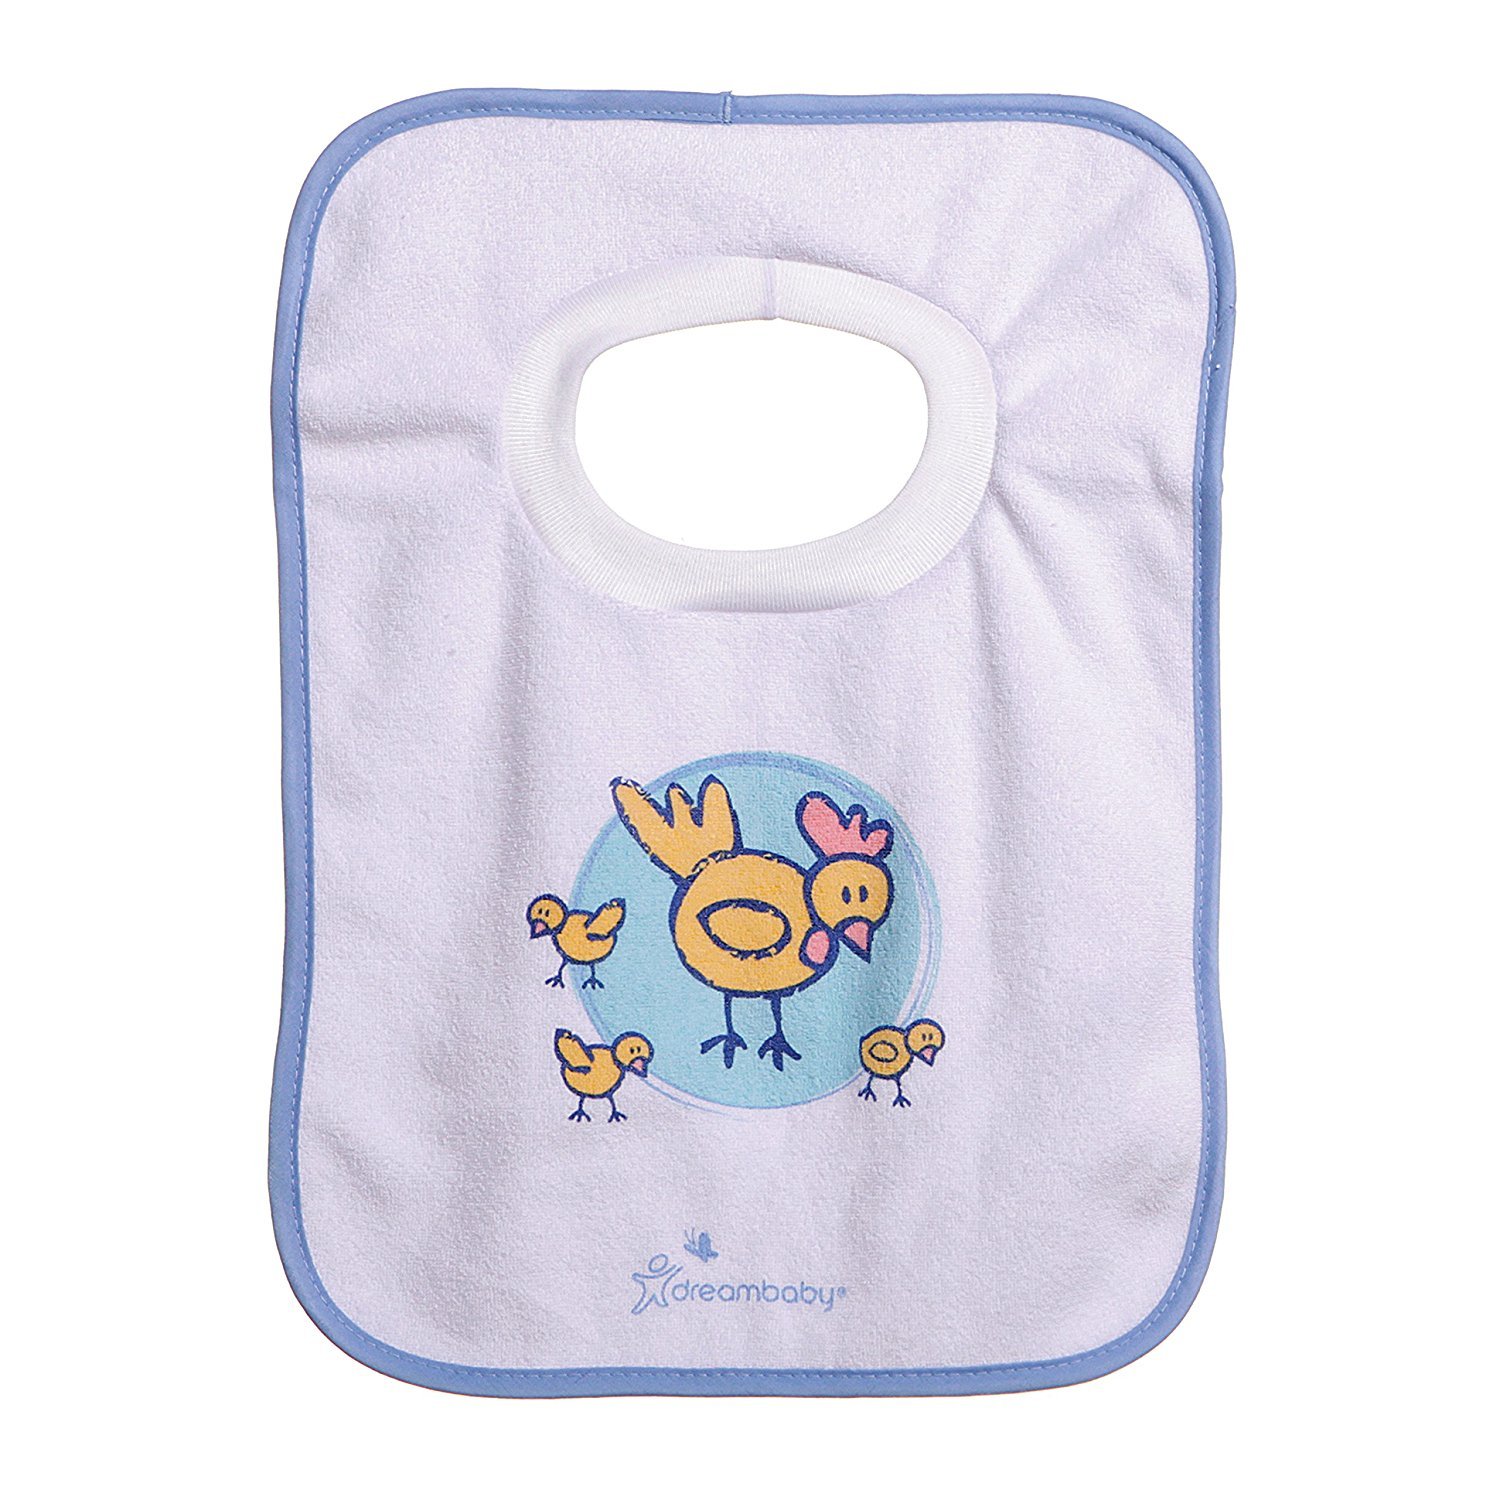 Dreambaby Terry Cloth Pullover Baby Bibs - Super Absorbent for Feeding and Drooling Toddlers - Farm Animals , 4 Count